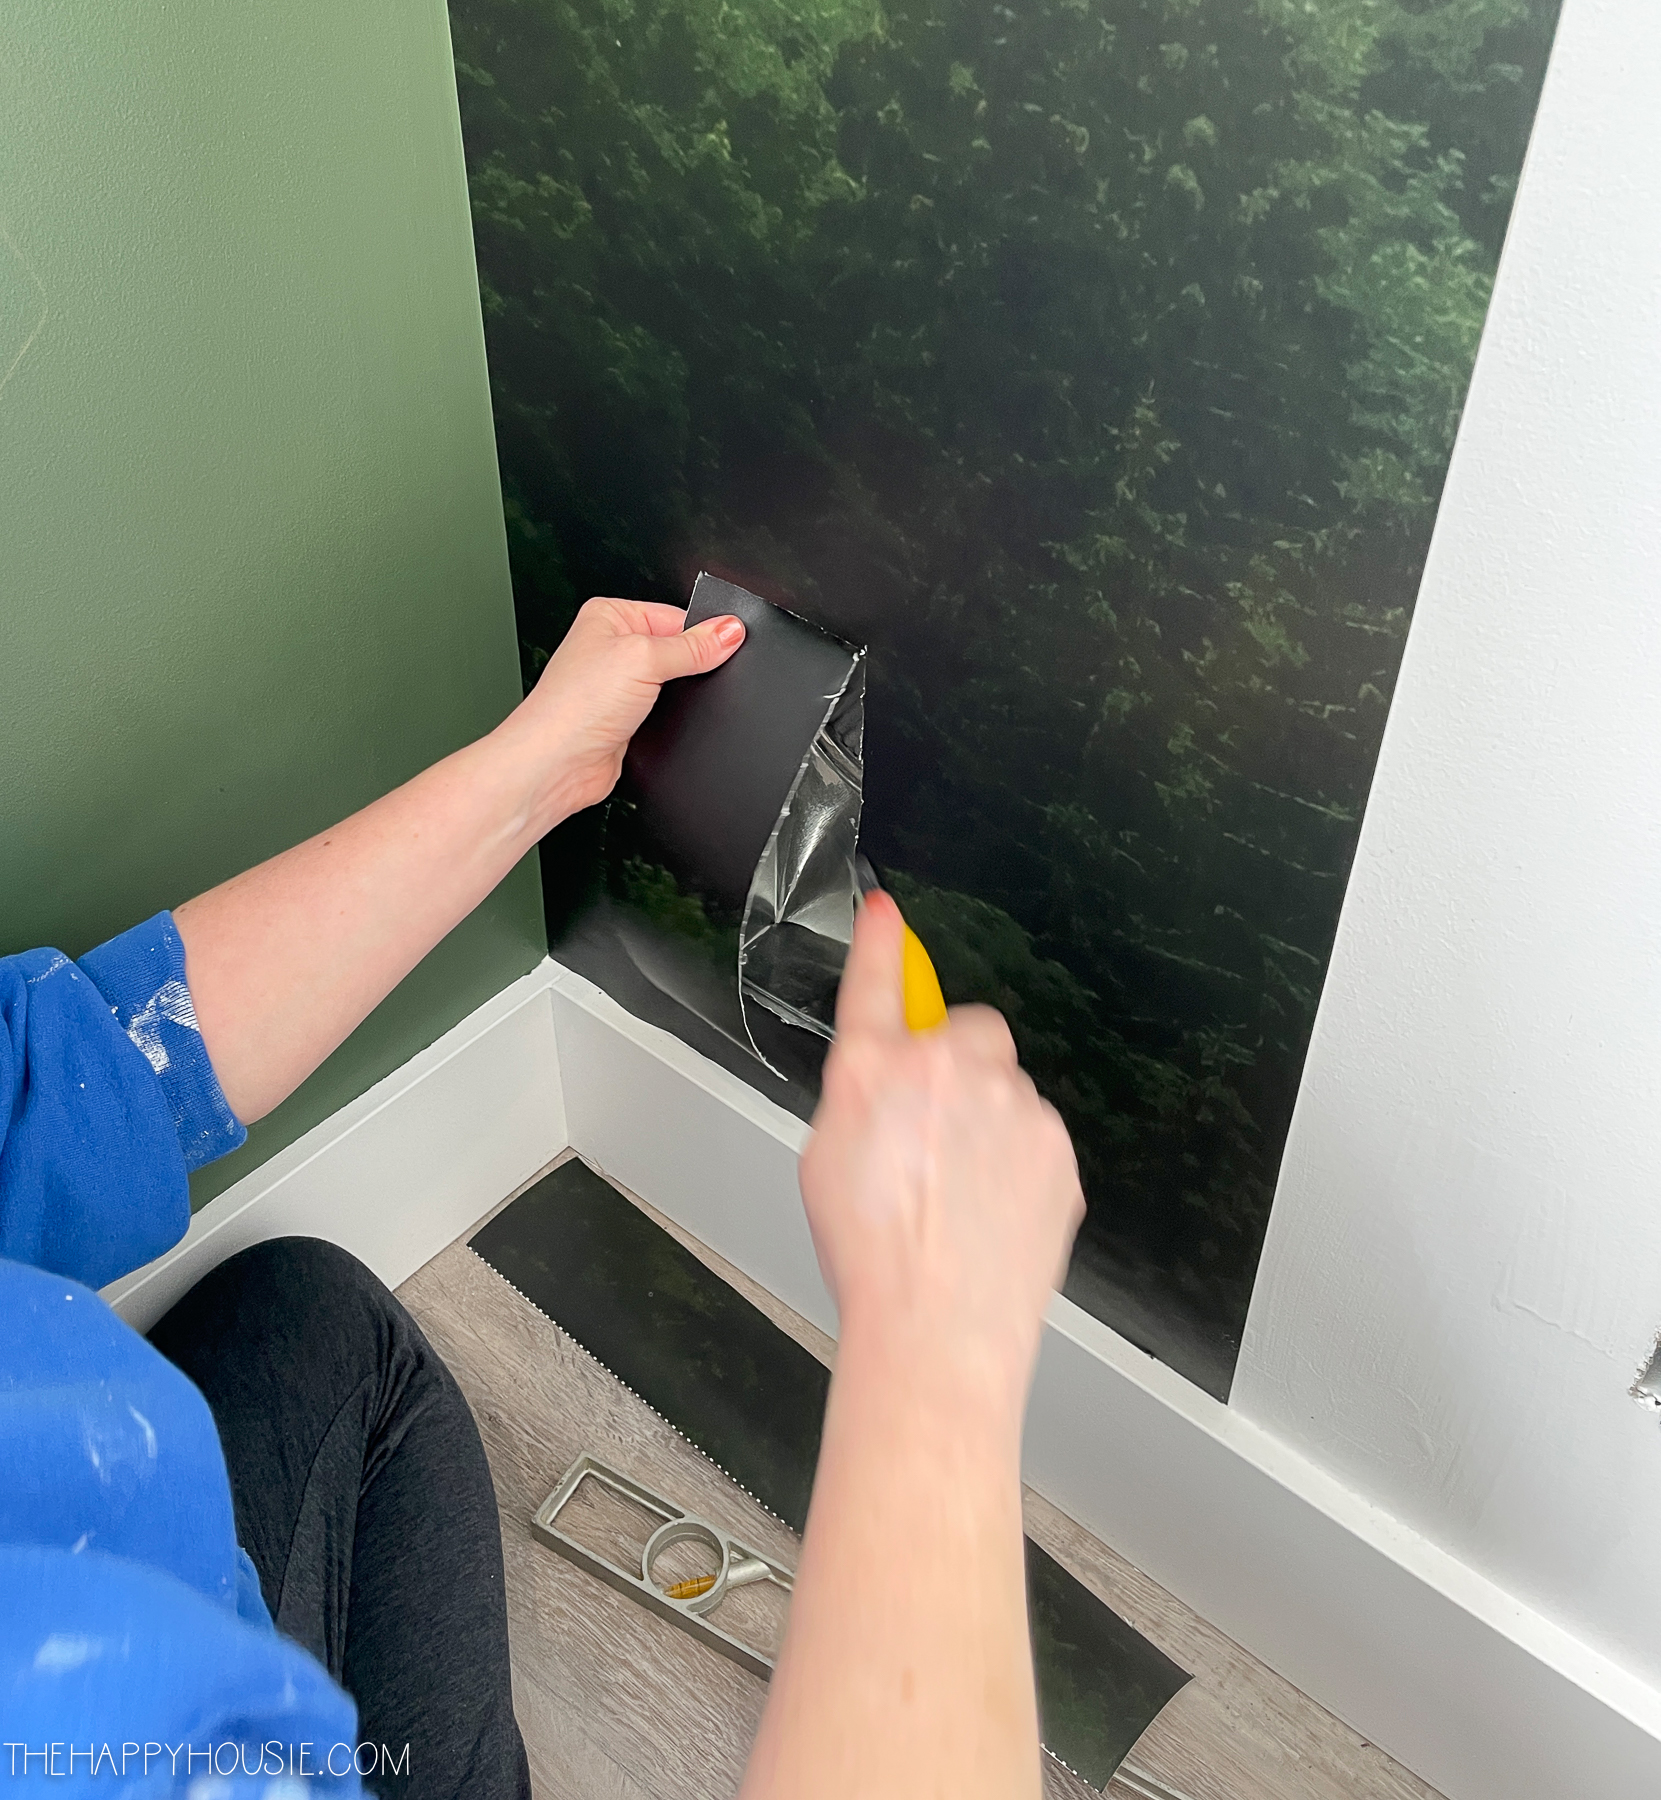 cutting the mural wallpaper around the wall vent